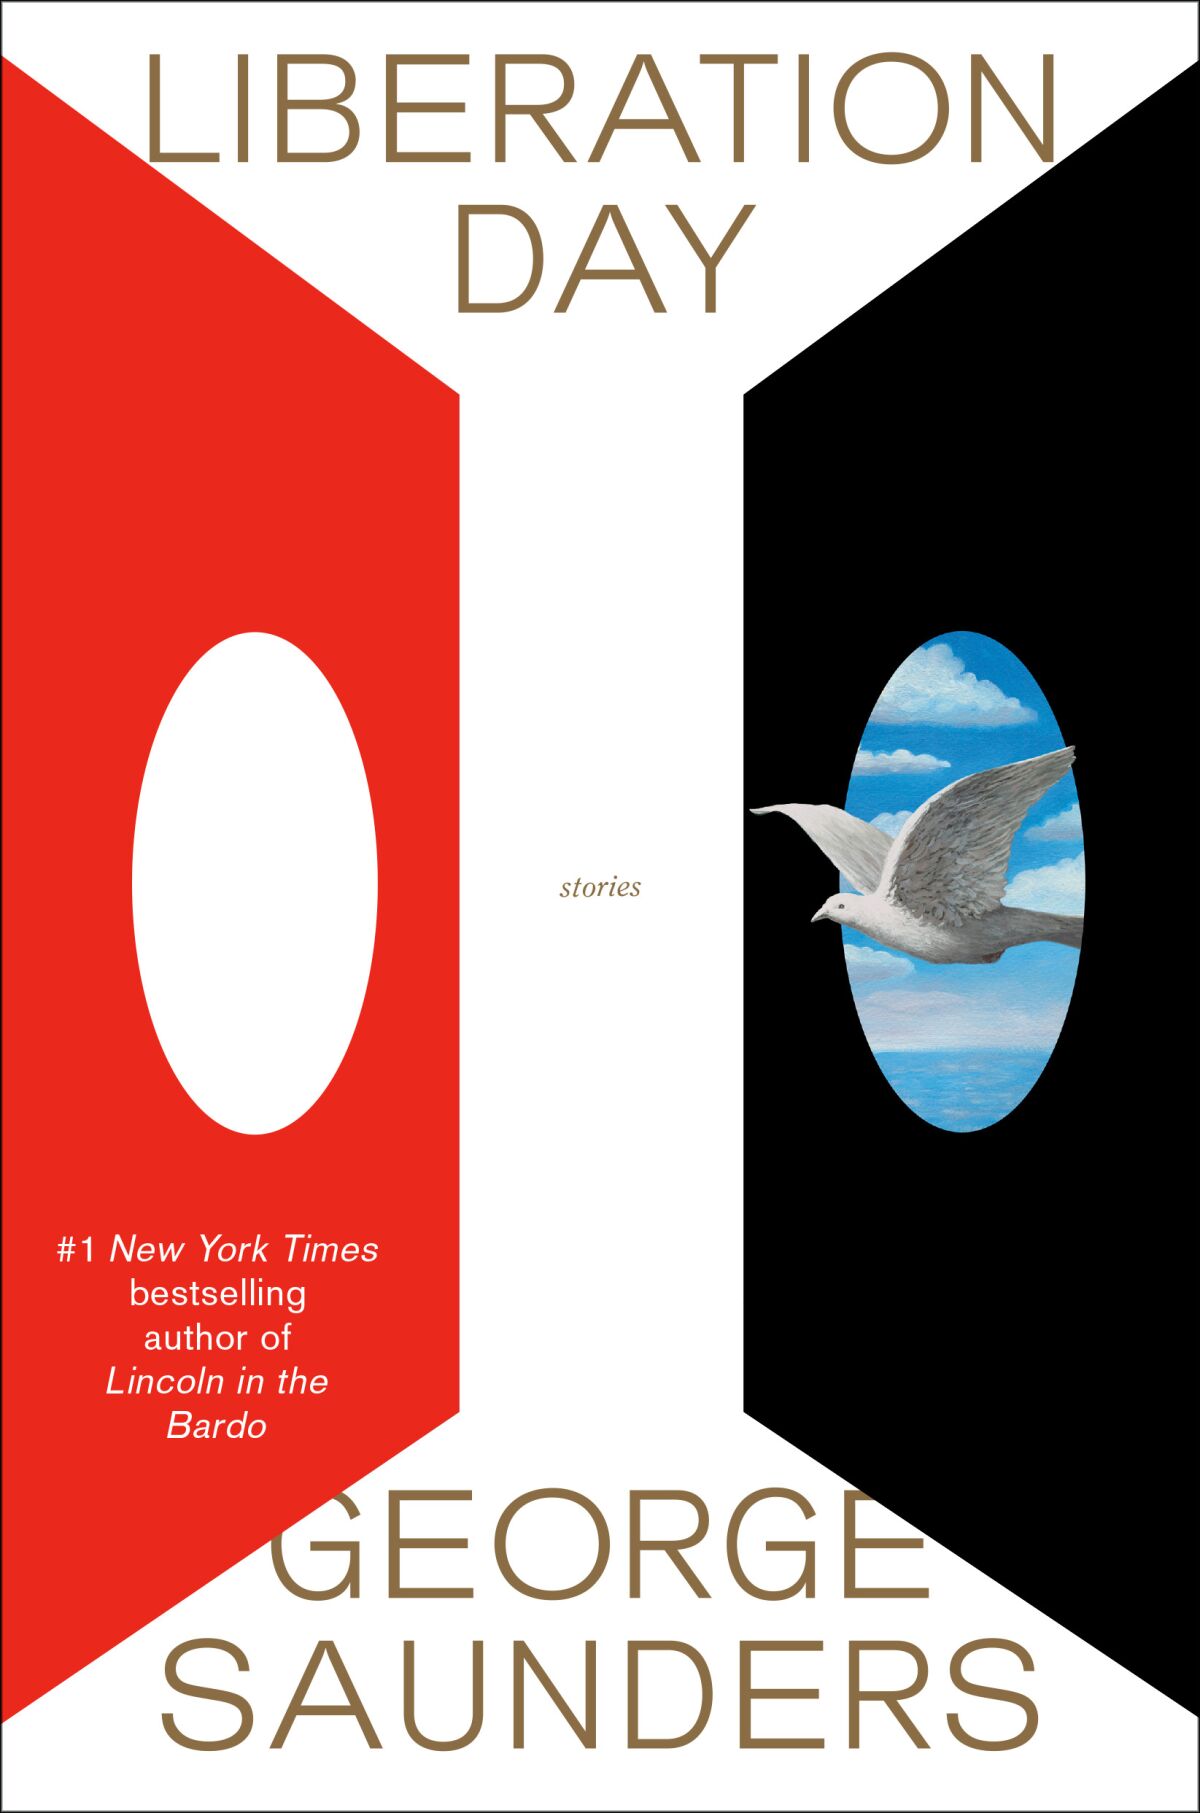 The book cover of "Liberation Day: Stories" by George Saunders